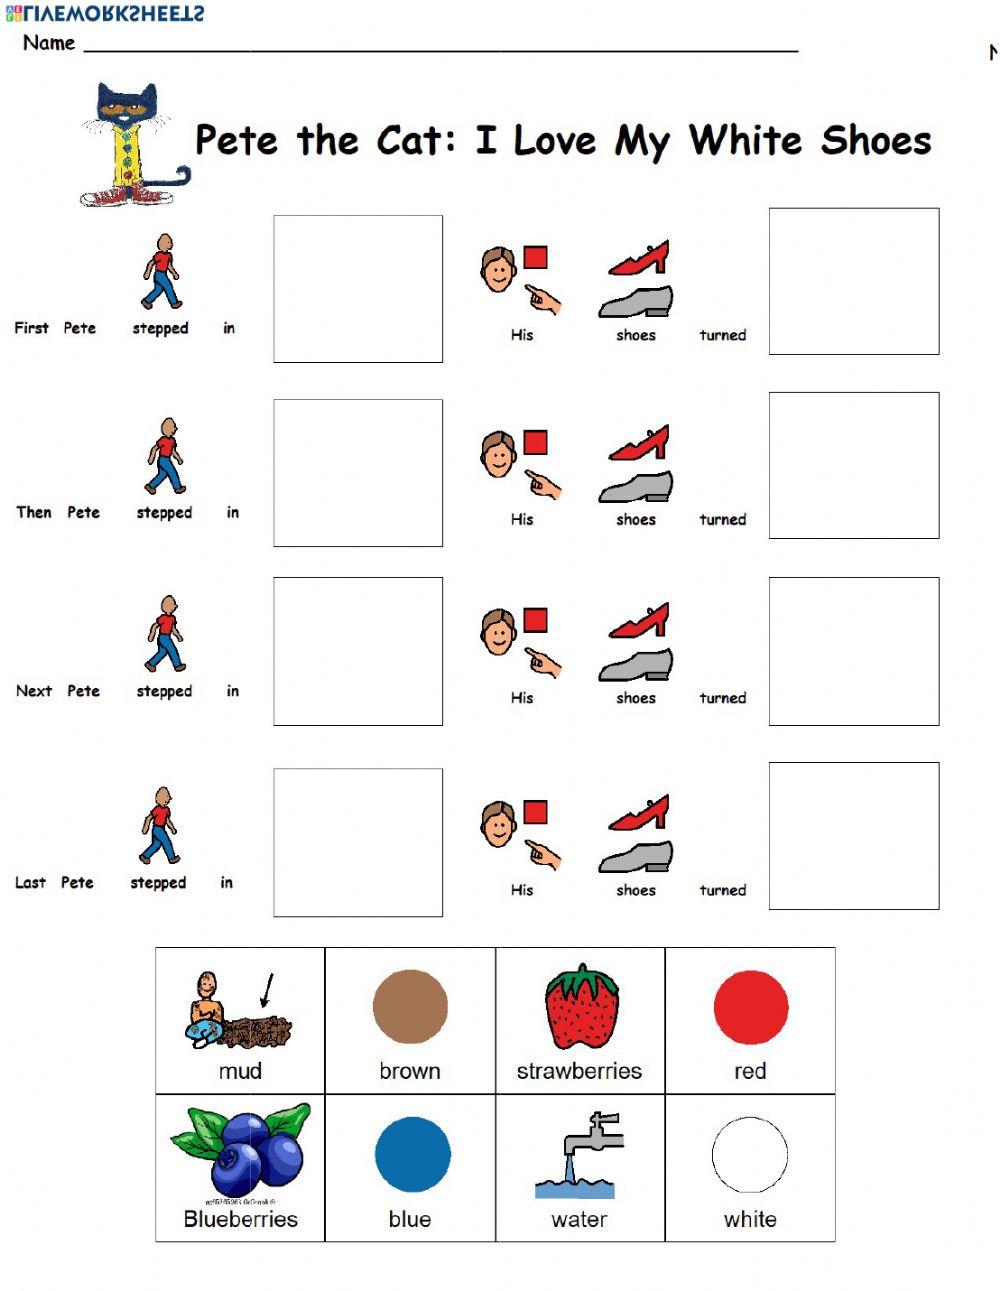 Pet the Cat: I love my White Shoes Sequencing Activity